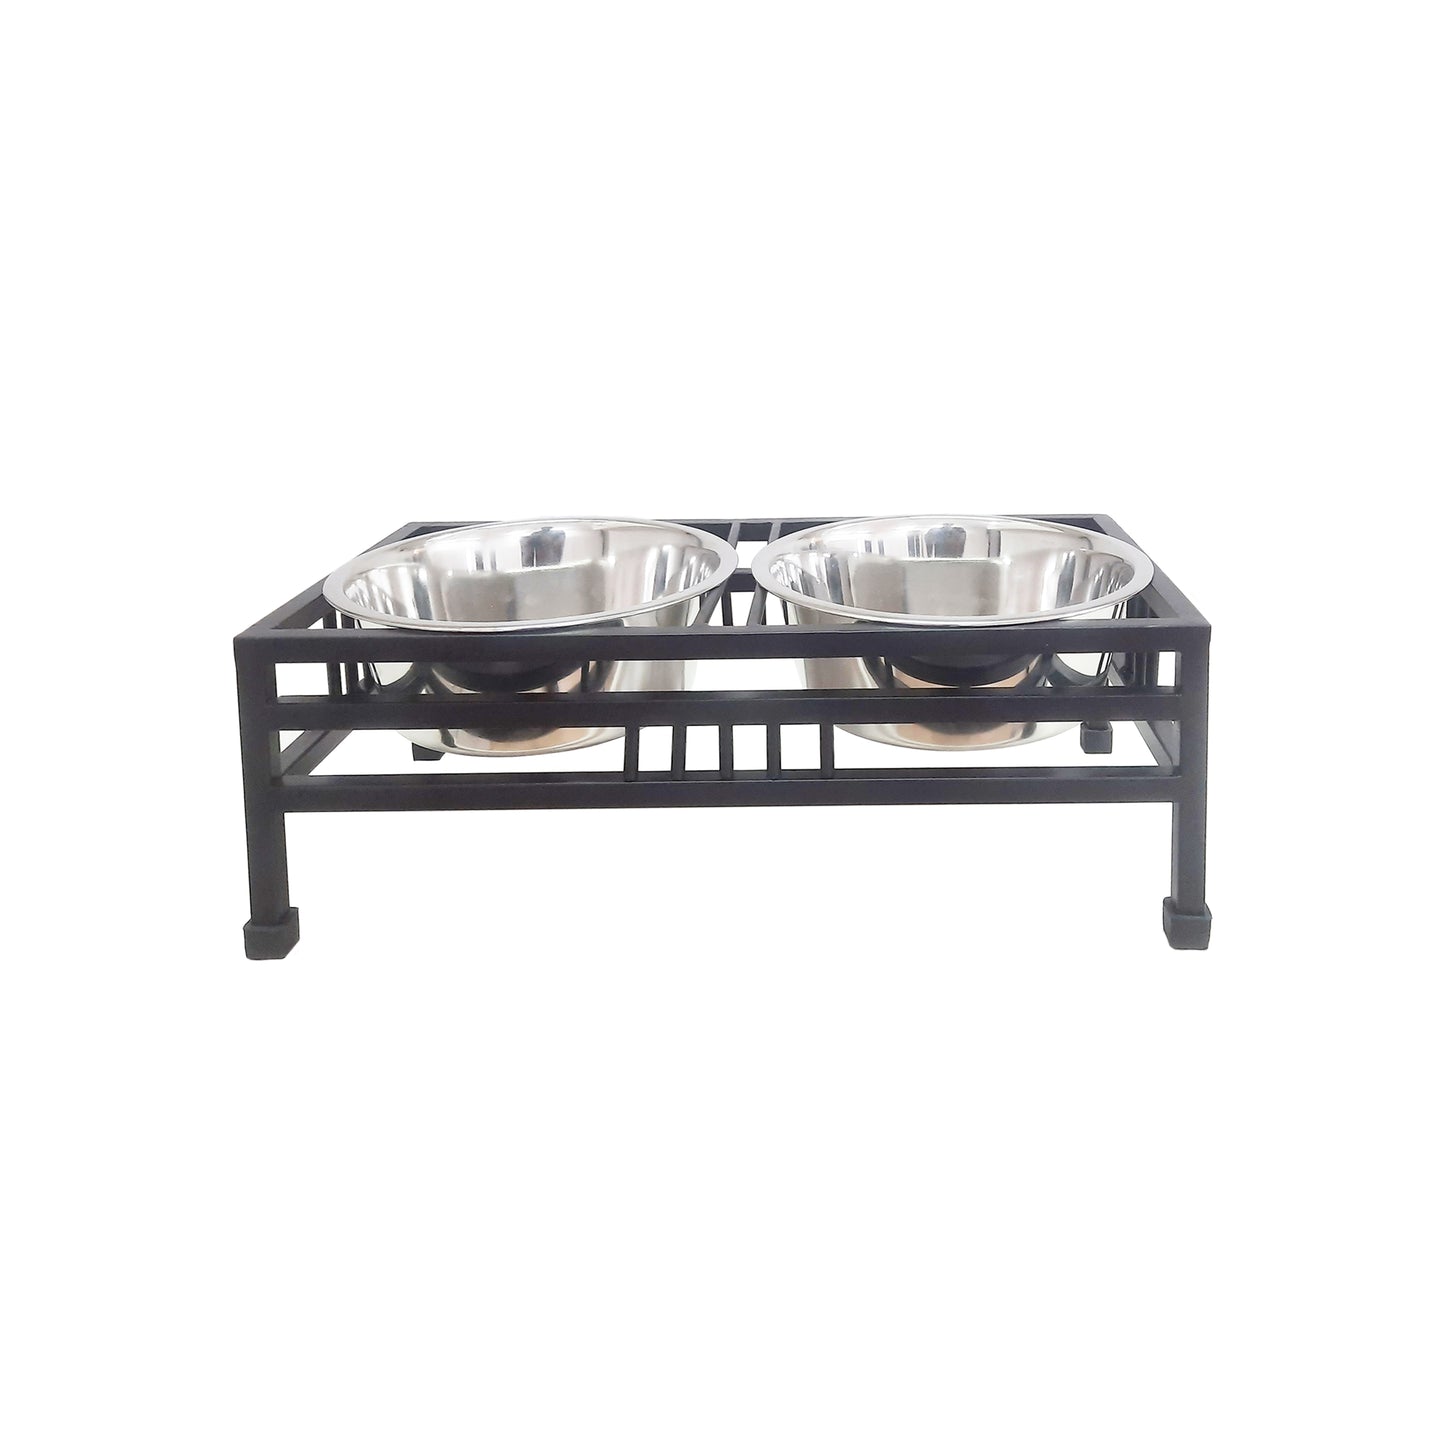 Elevated Rectangular Pet Double Diner with Stainless Steel Bowls for Dogs and Cats